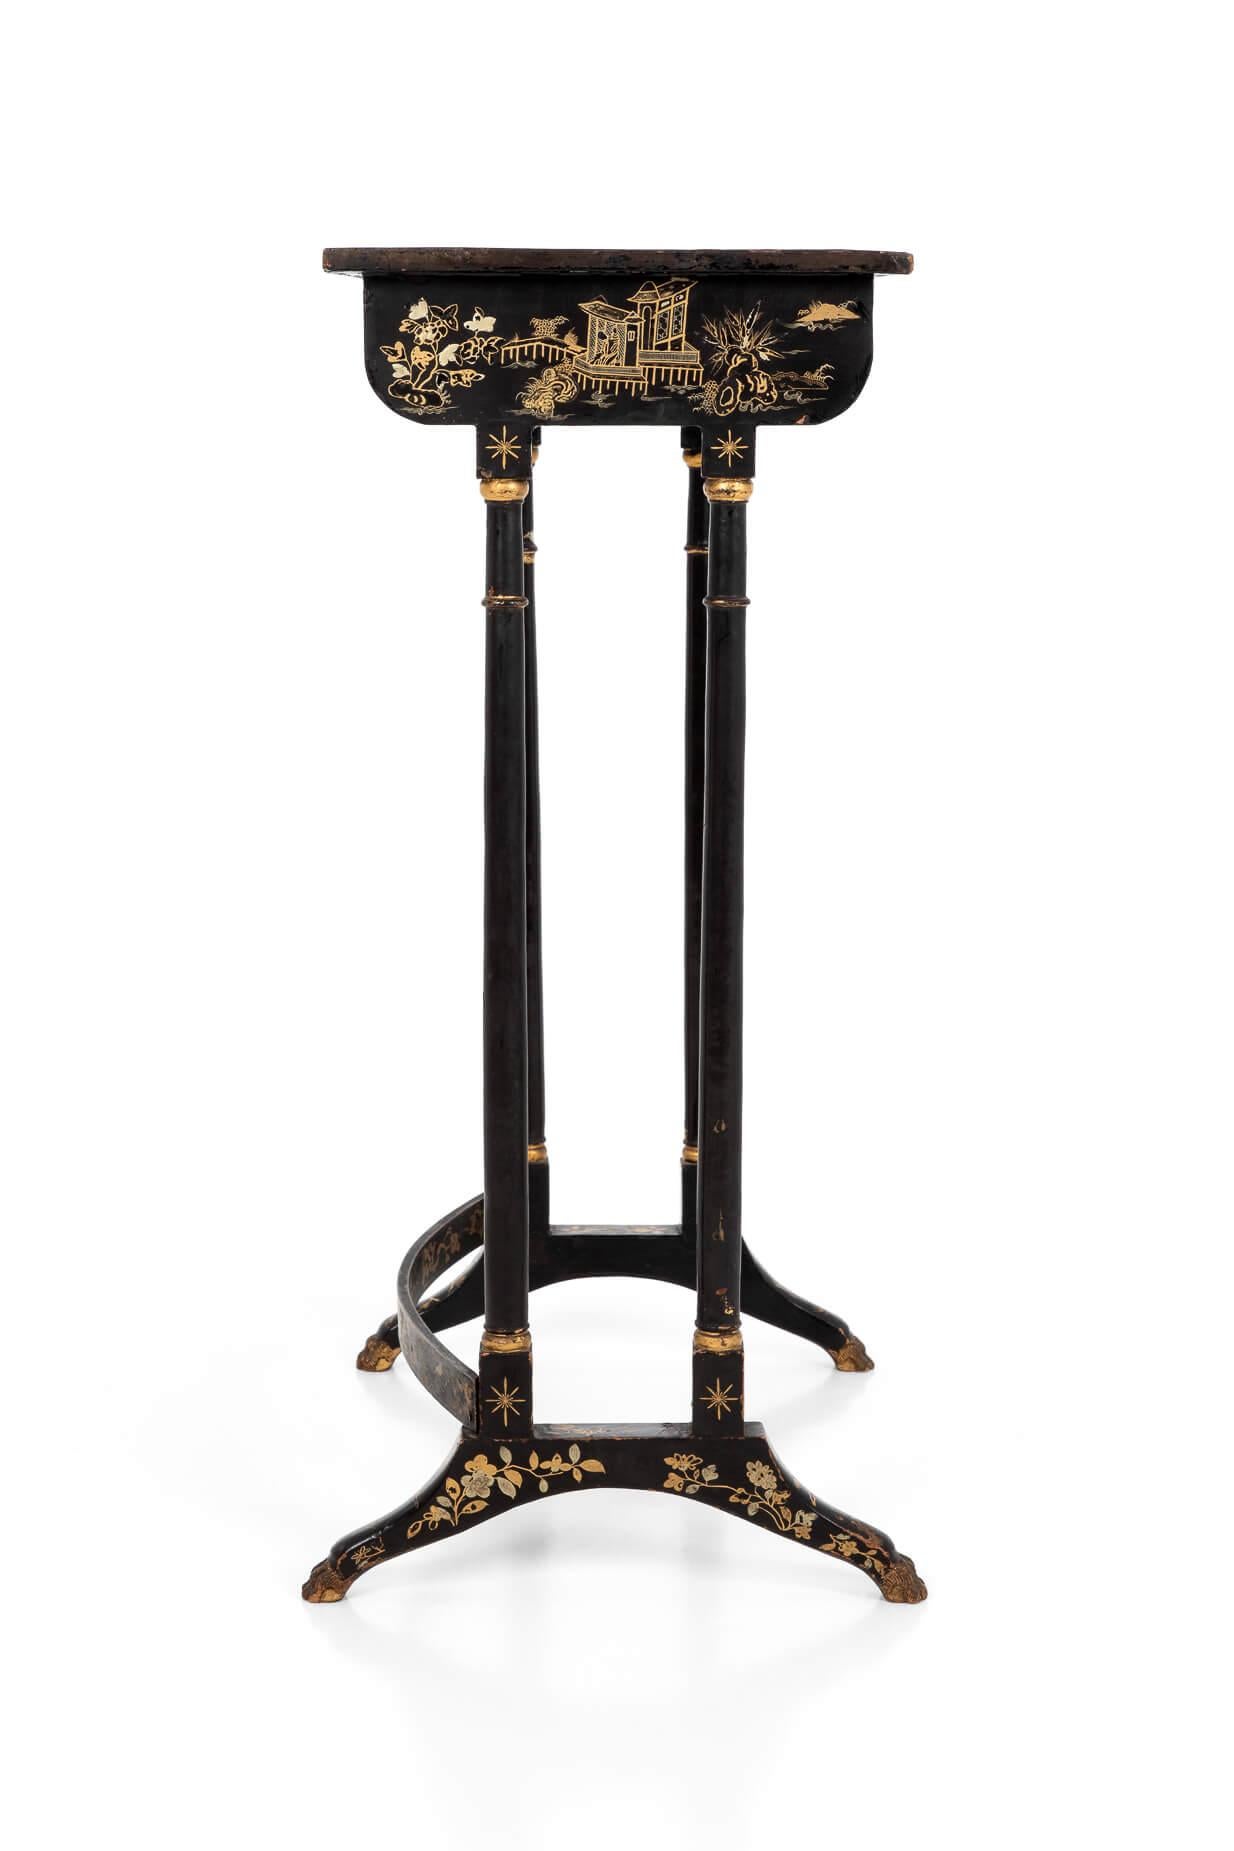 Nest of Three Regency Chinoiserie Gilt And Black Lacquer Tables, circa 1815 In Good Condition For Sale In Faversham, GB